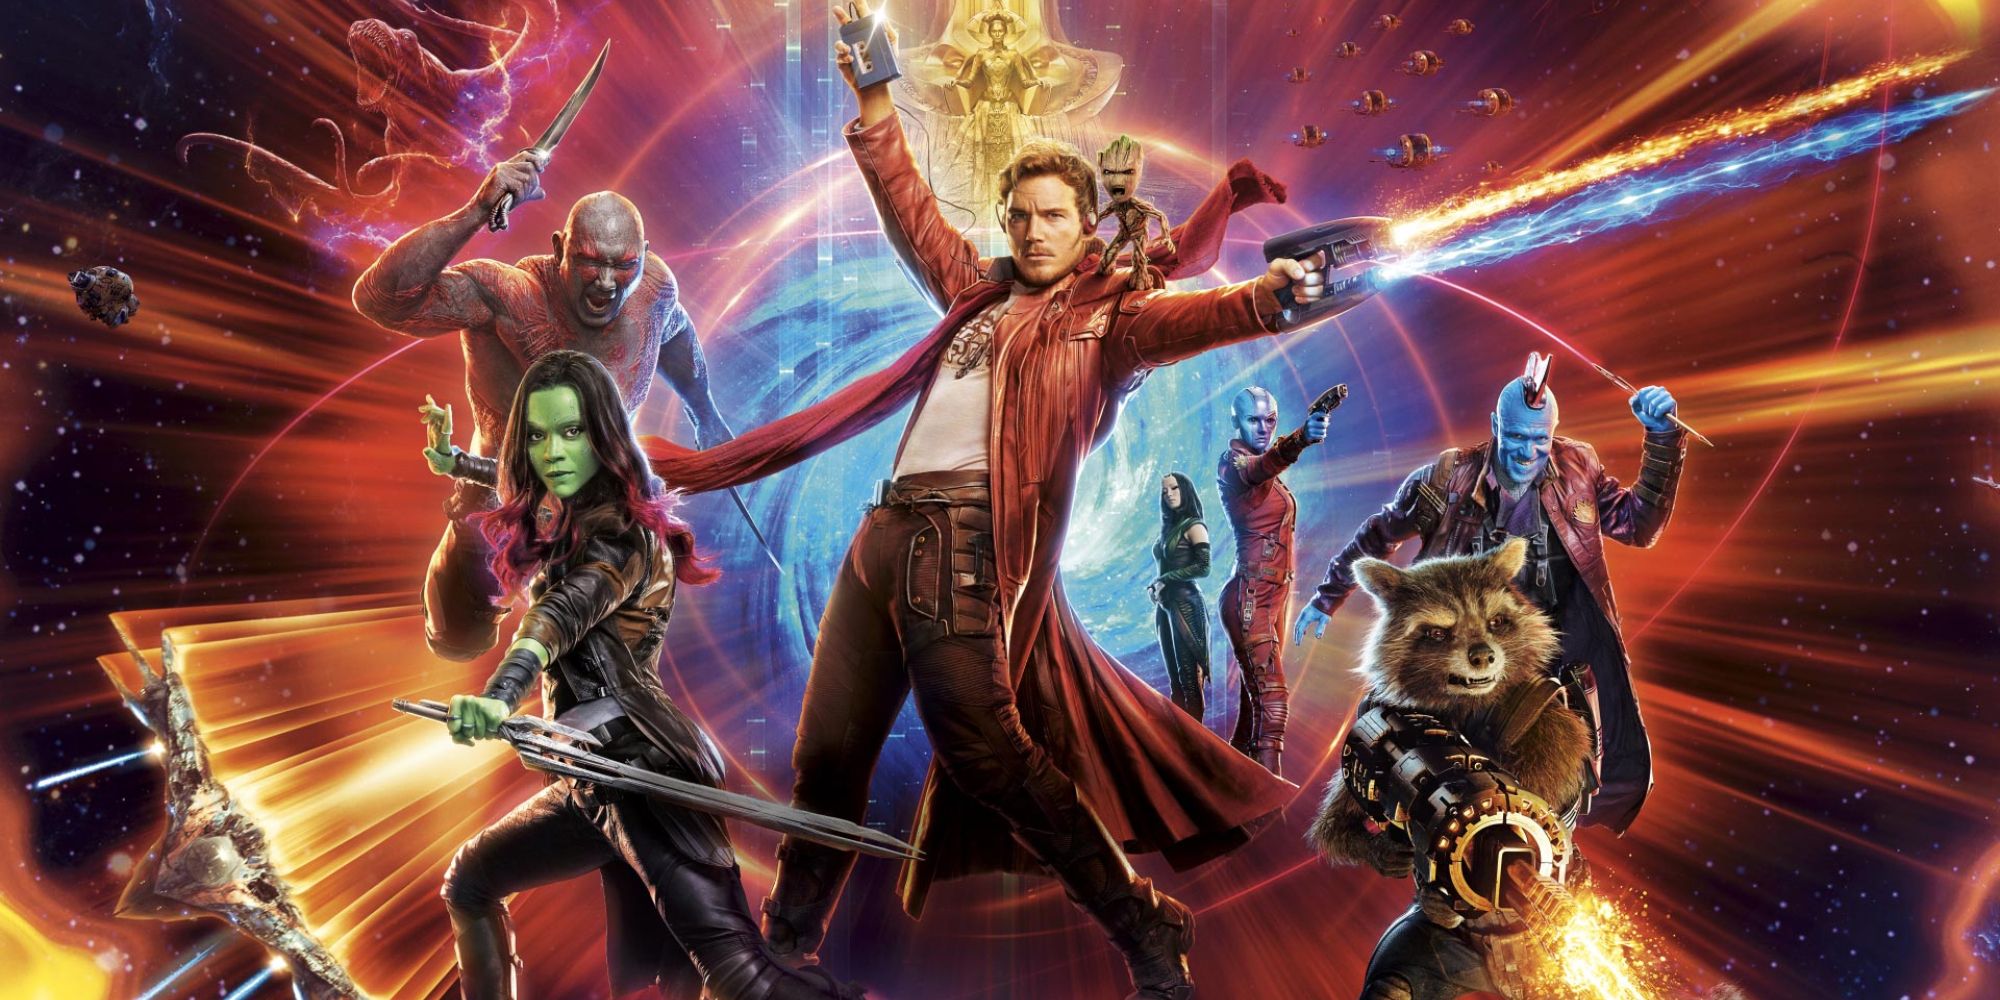 Guardians-of-the-Galaxy-1